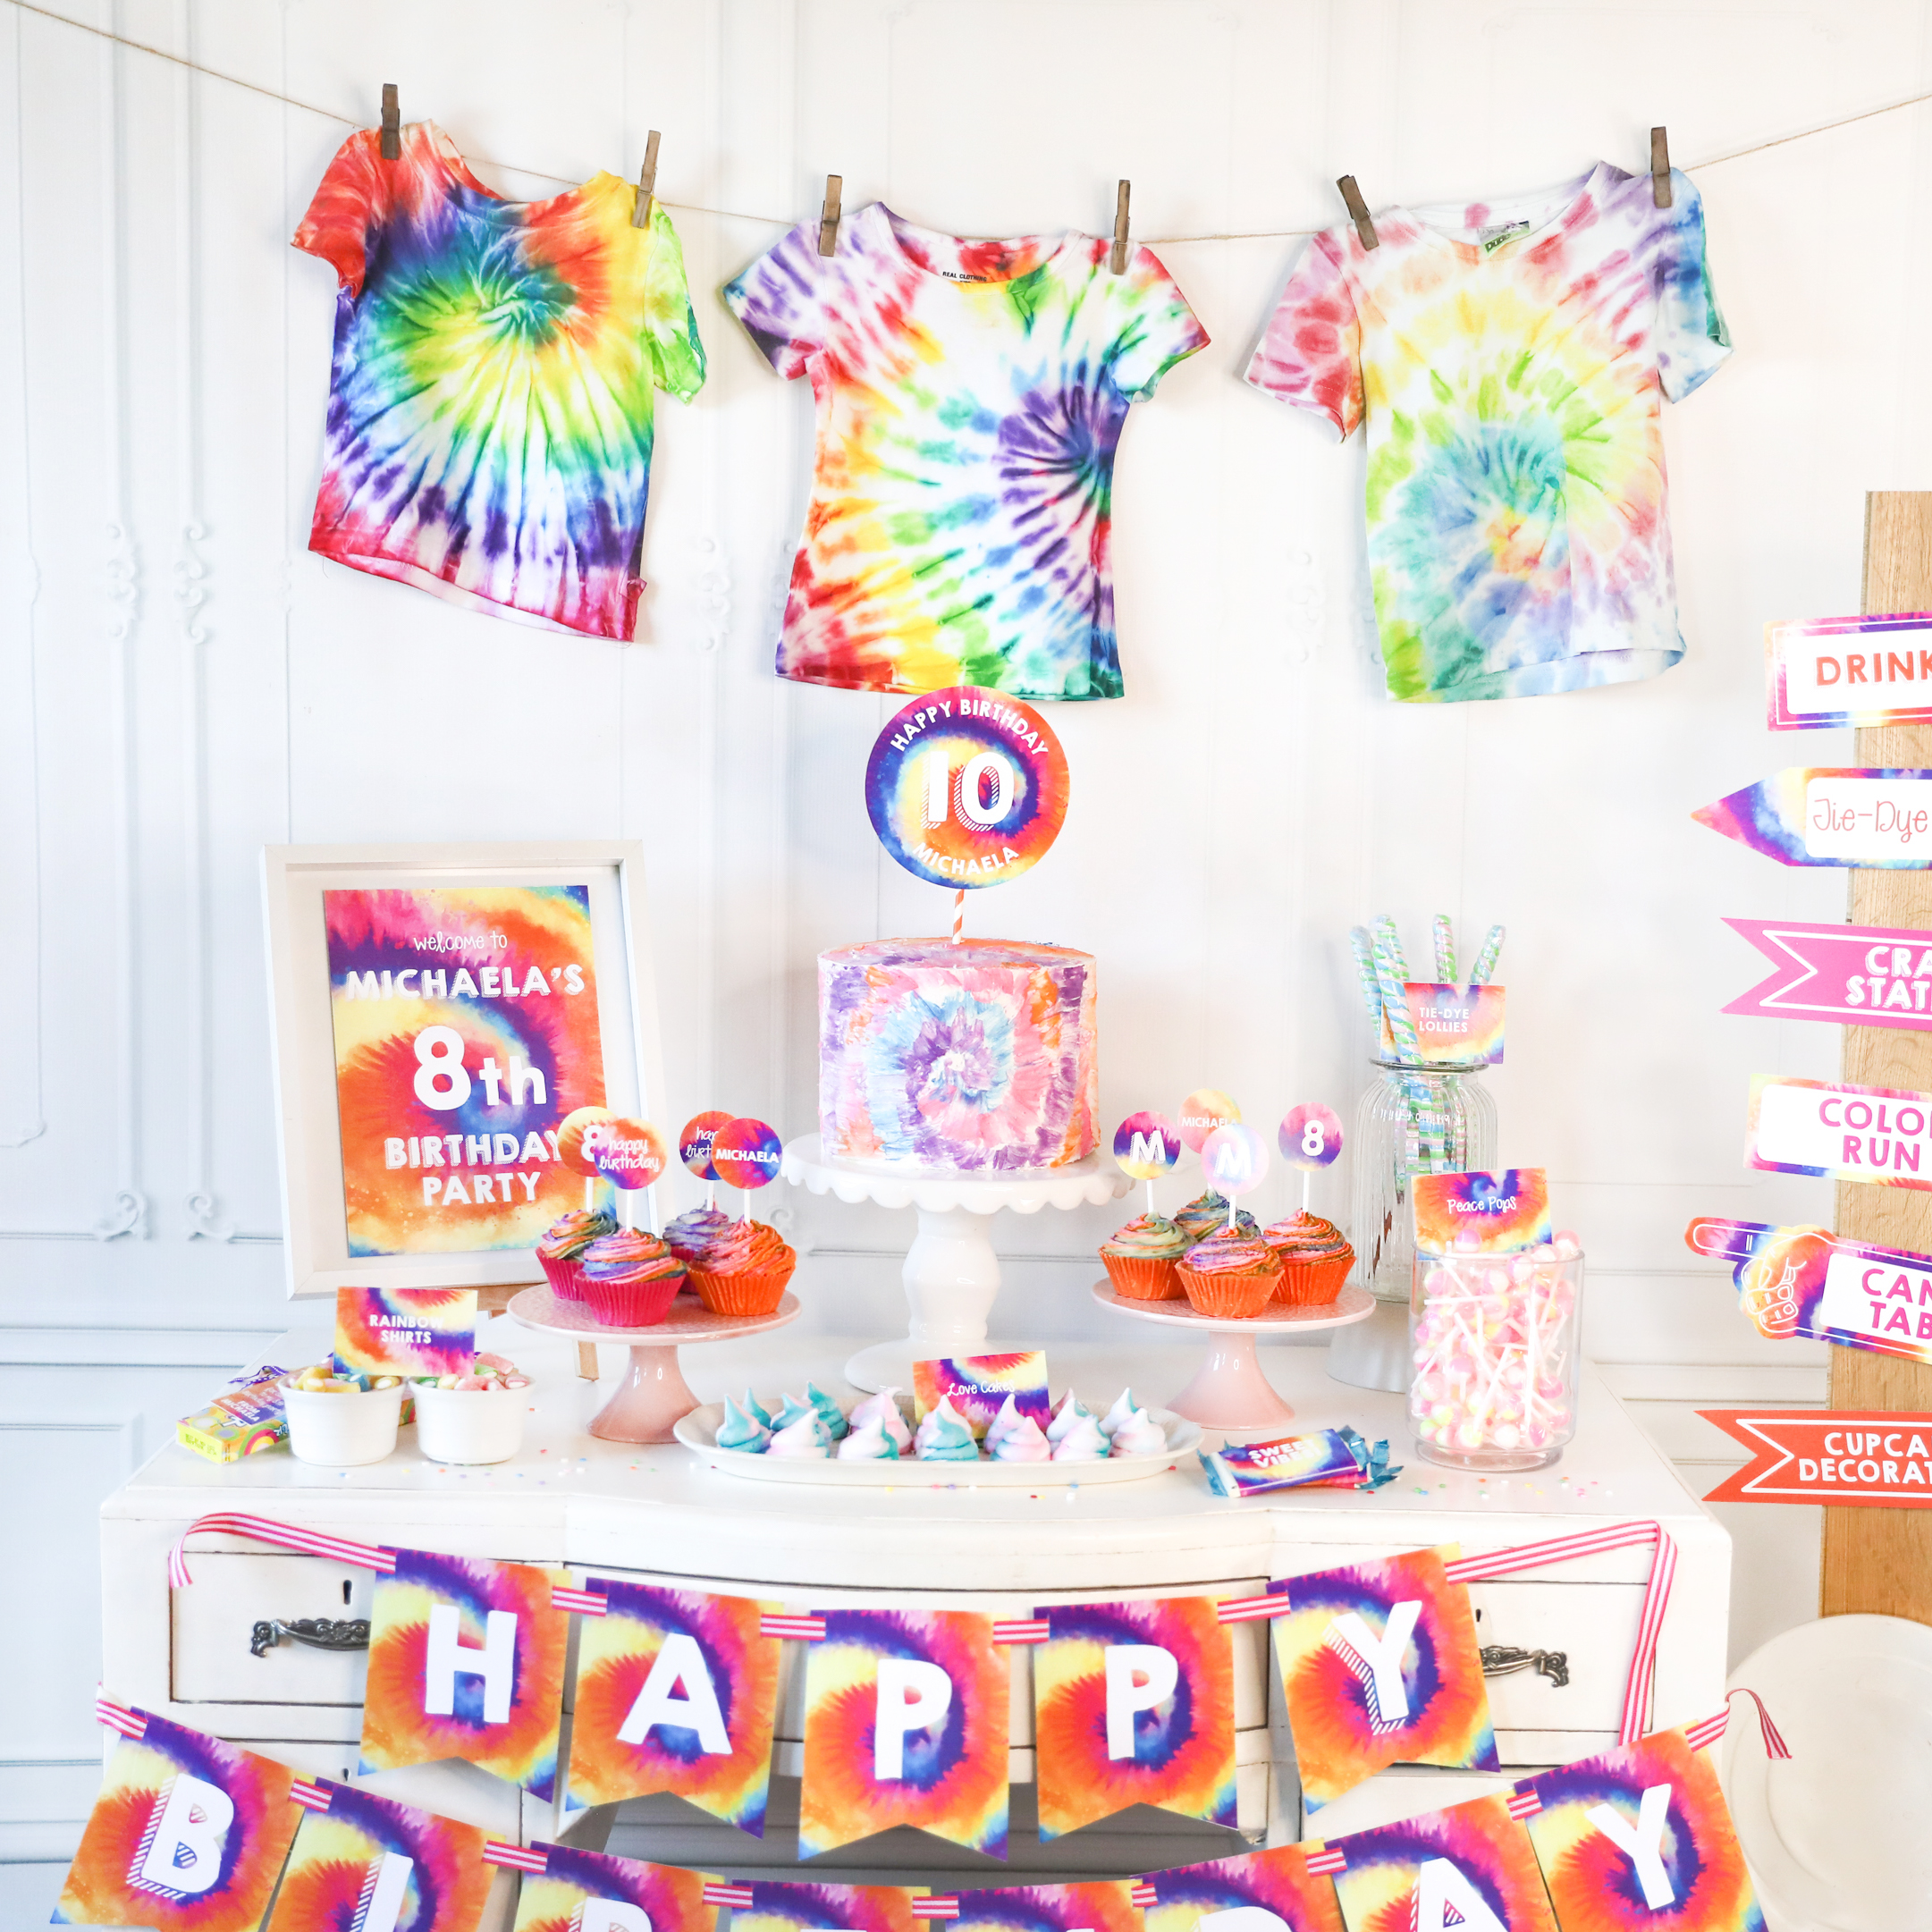 How To Throw A Tie-Dye Party - Sunshine Parties Printables